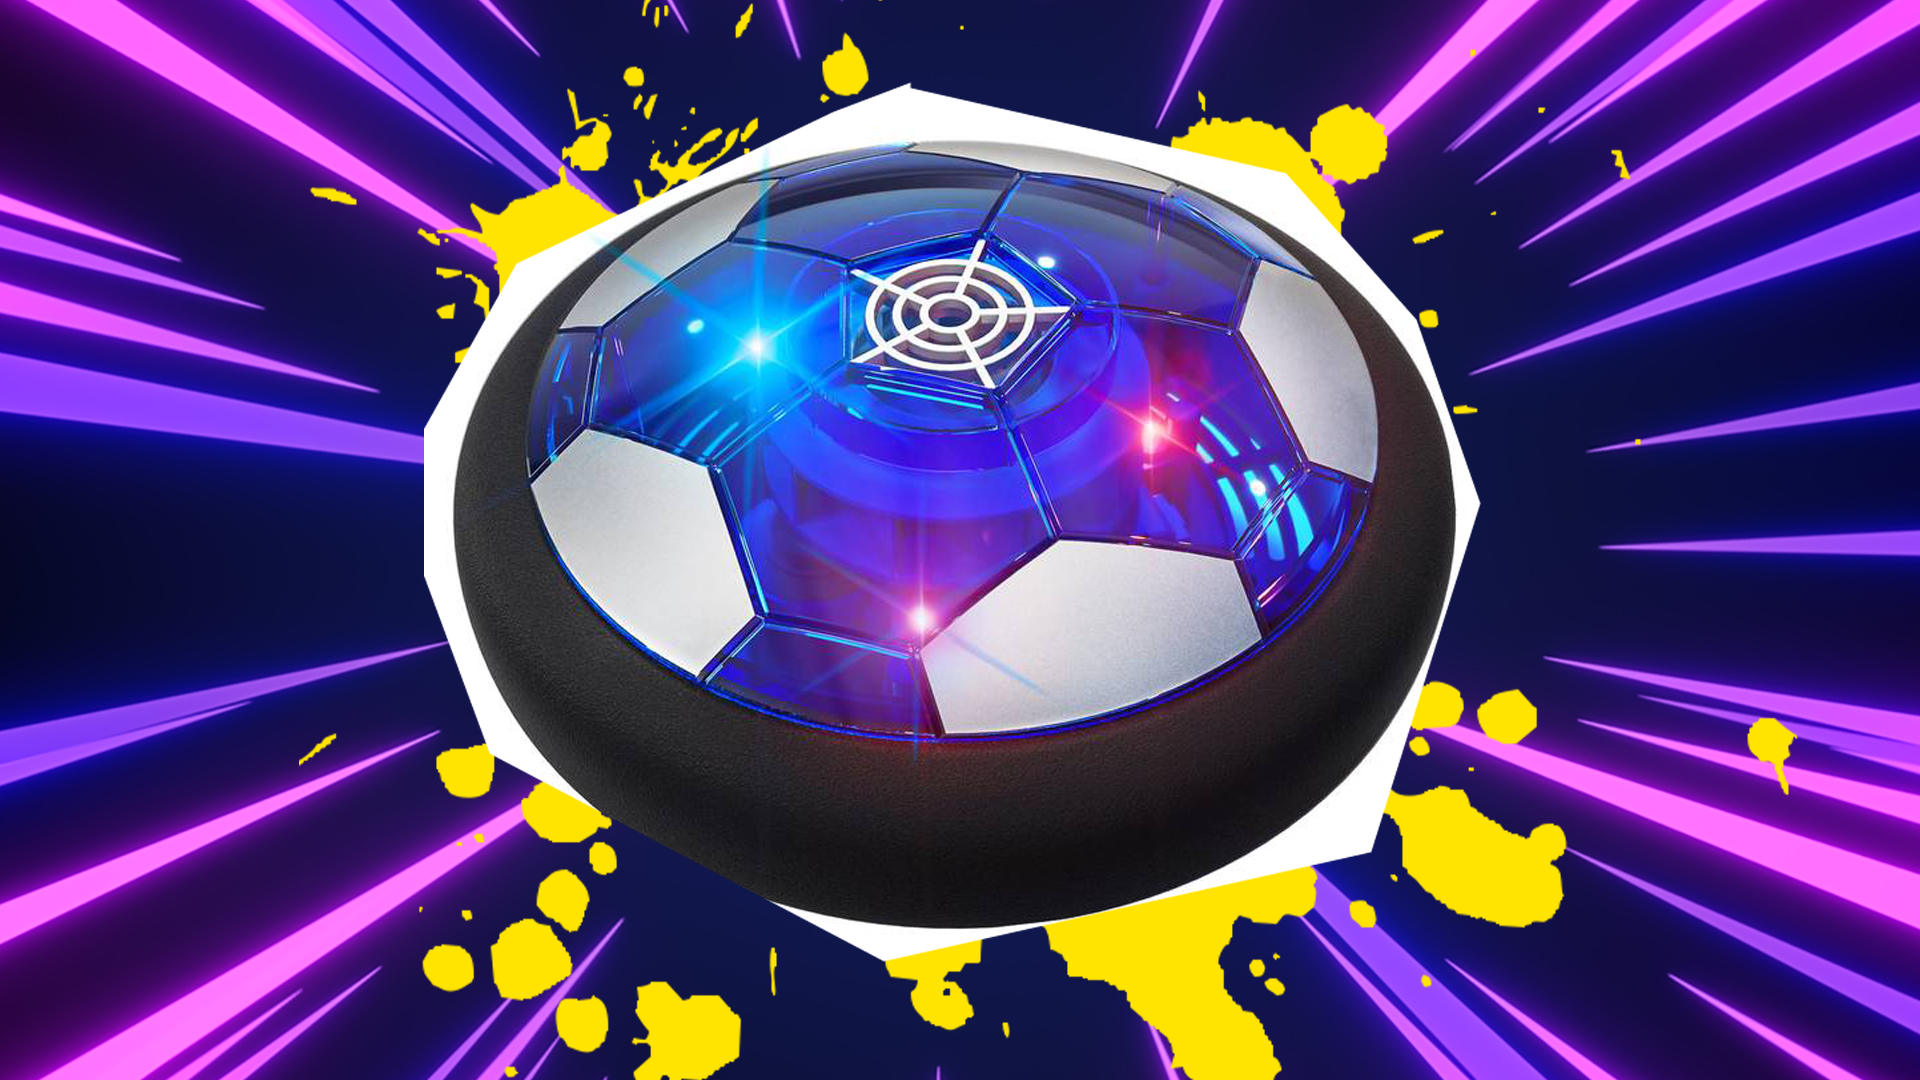 You got the Hover Soccer Ball because you're VERY into football! You're always seen playing some kind of sport, day or night!